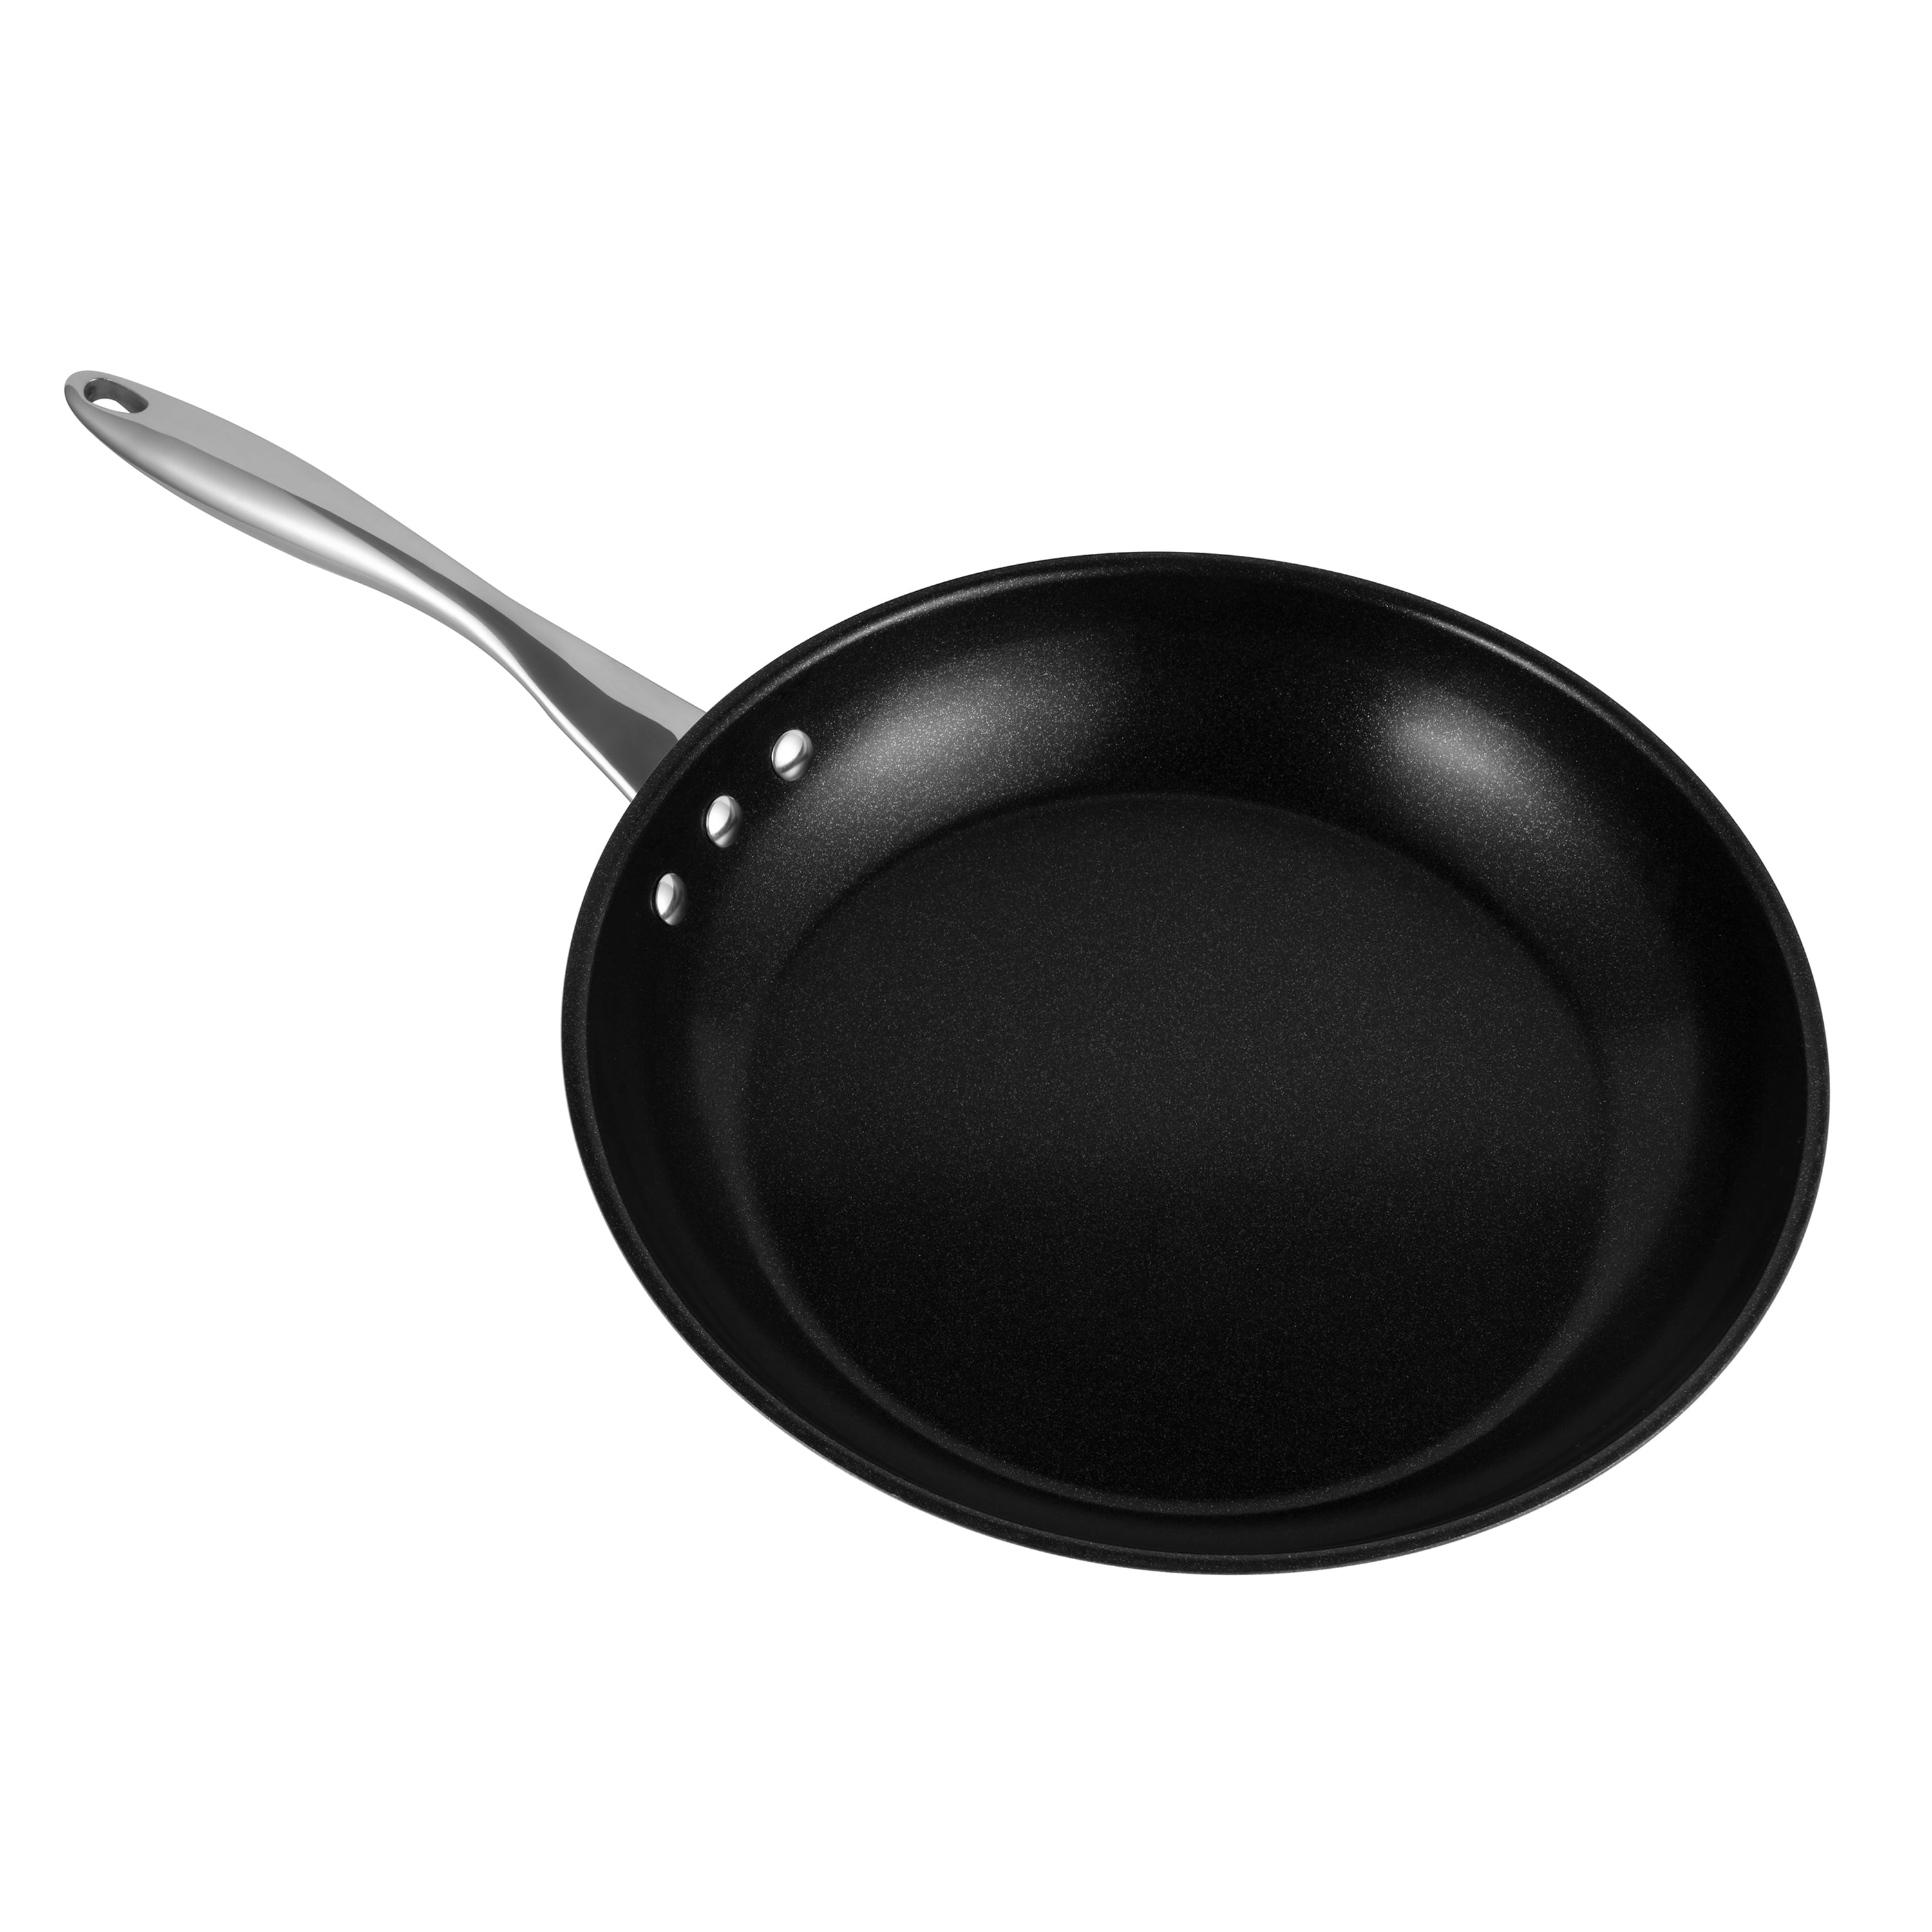 YOSUKATA Coating-Free Carbon Steel Pan - Durable 10 1/4 Inch Frying Pan -  Pans for Cooking Delicious Meals - Carbon Steel Pan with Removable